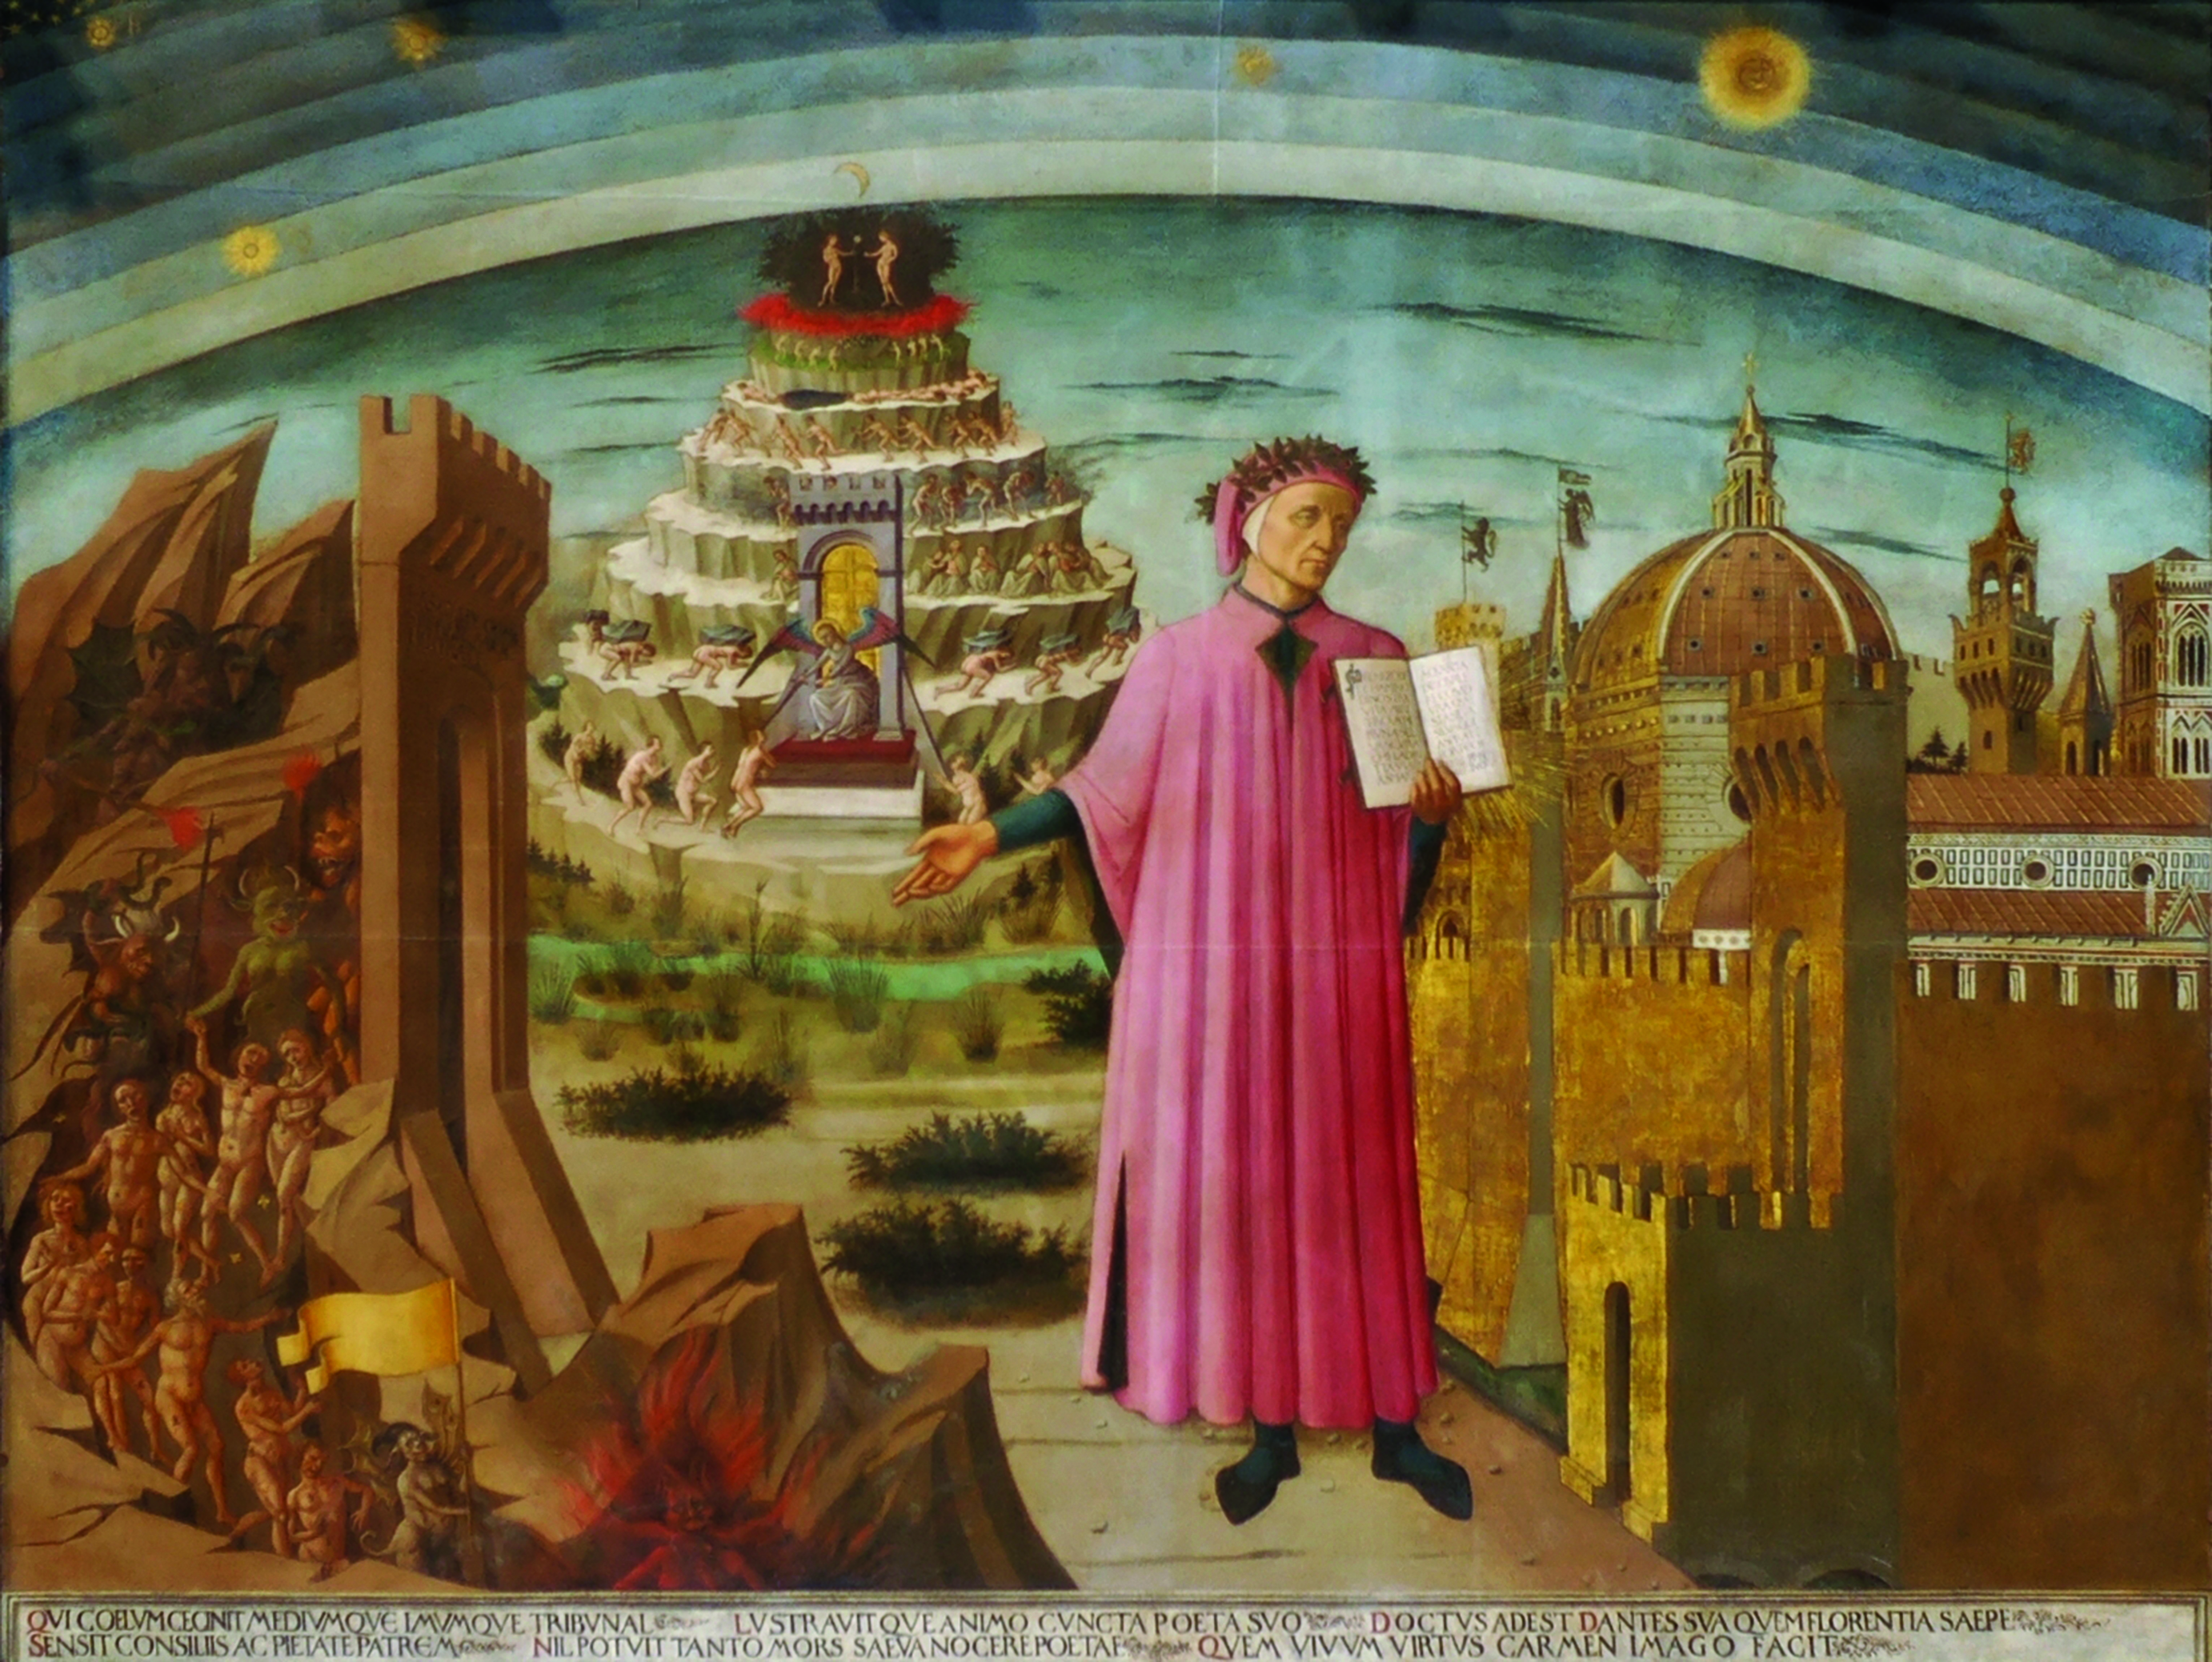 The painting of Dante inside the Florentine cathedral